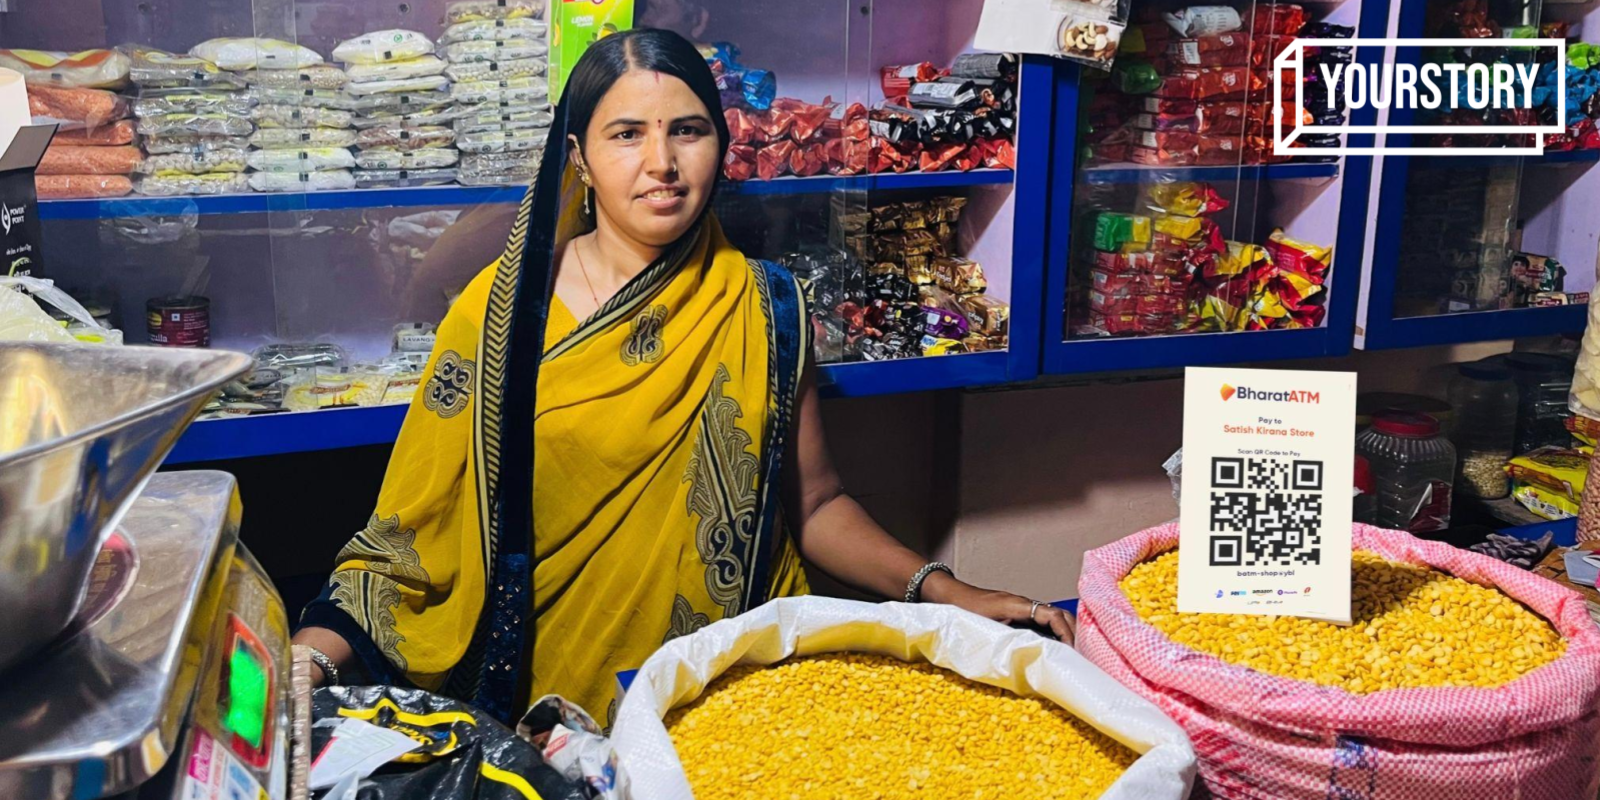 With 11,230 women on board, BharatATM’s ‘bank sakhi’ programme is truly driving financial inclusion in India